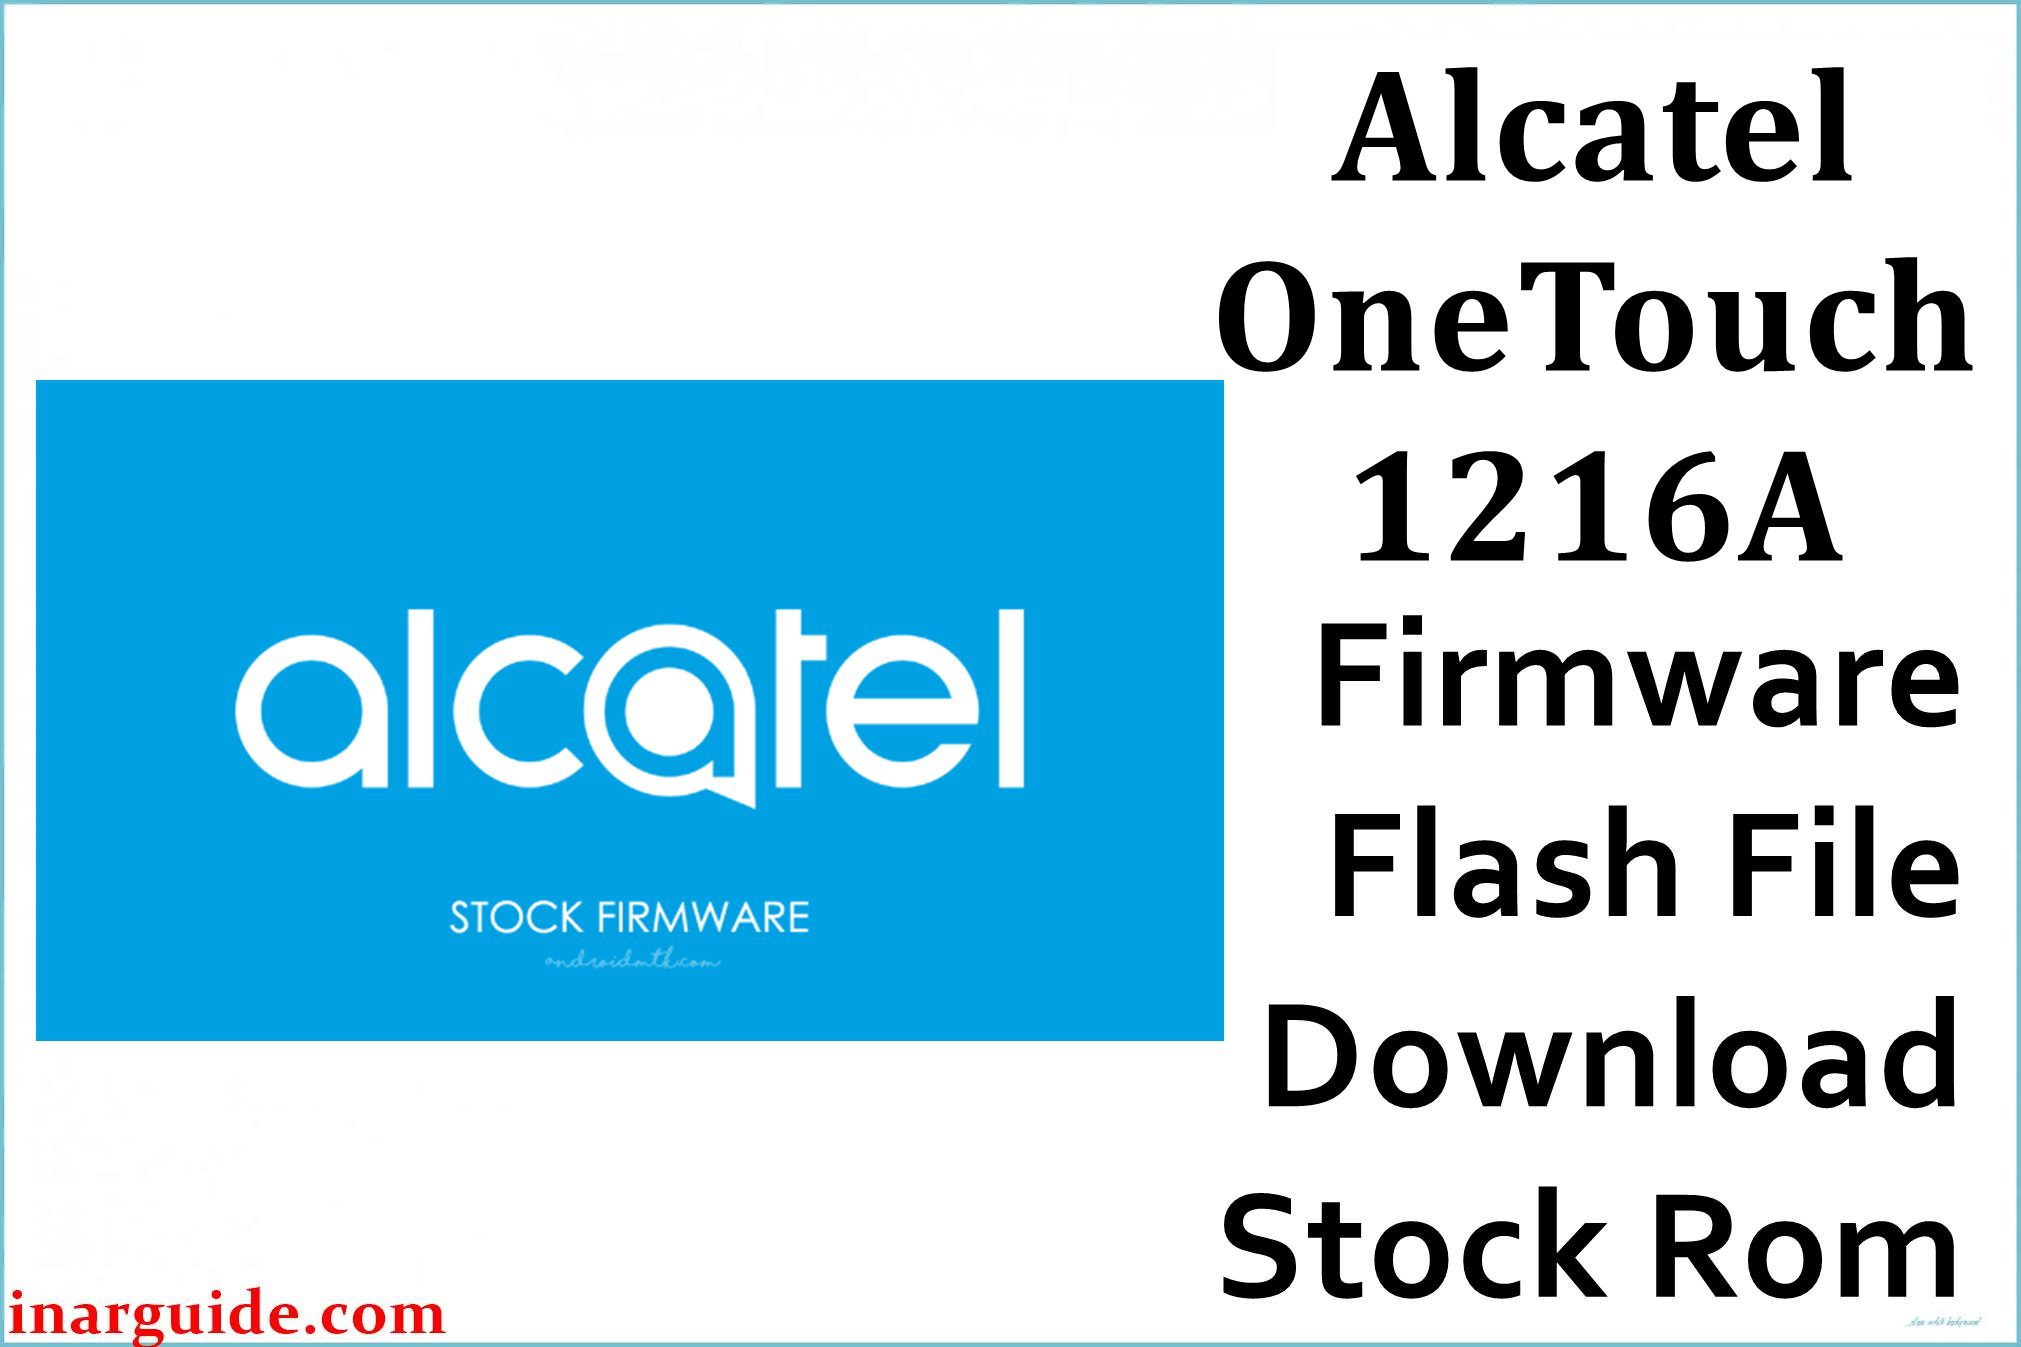 Alcatel OneTouch 1216A